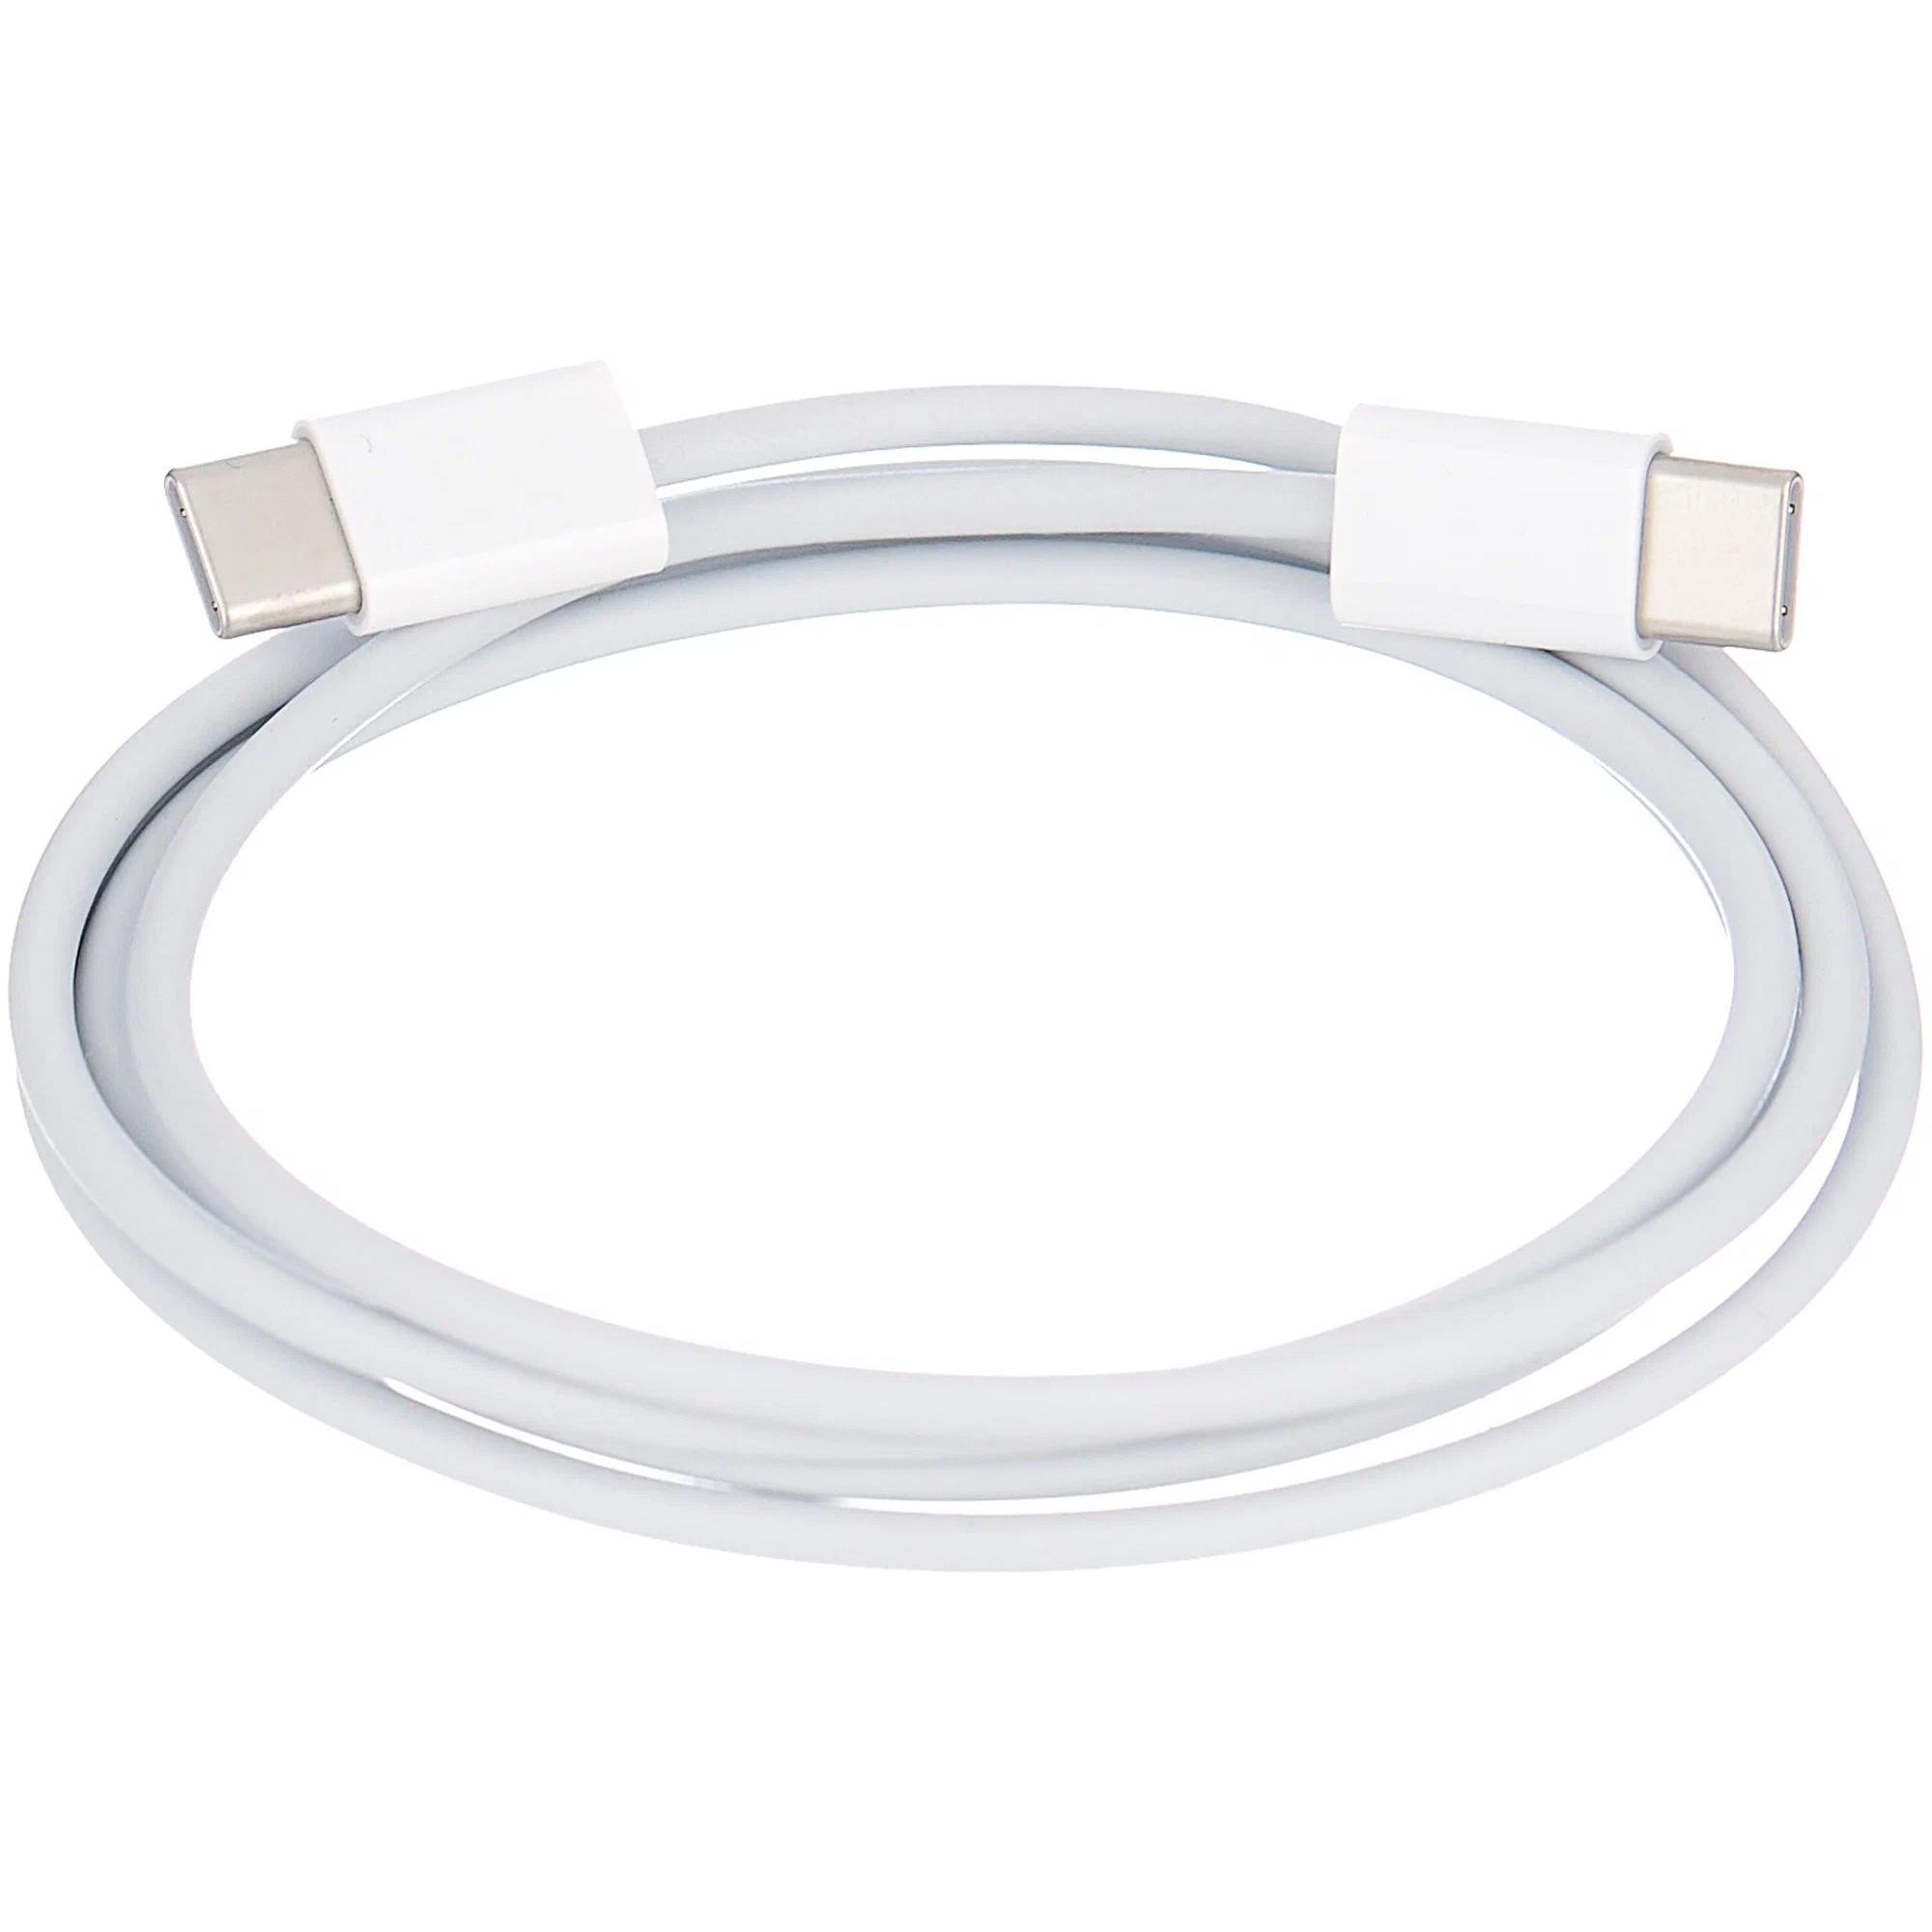 Кабель Apple USB-C Charge Cable (1m) MM093ZM/A кабель usb apple mm093zm a белый